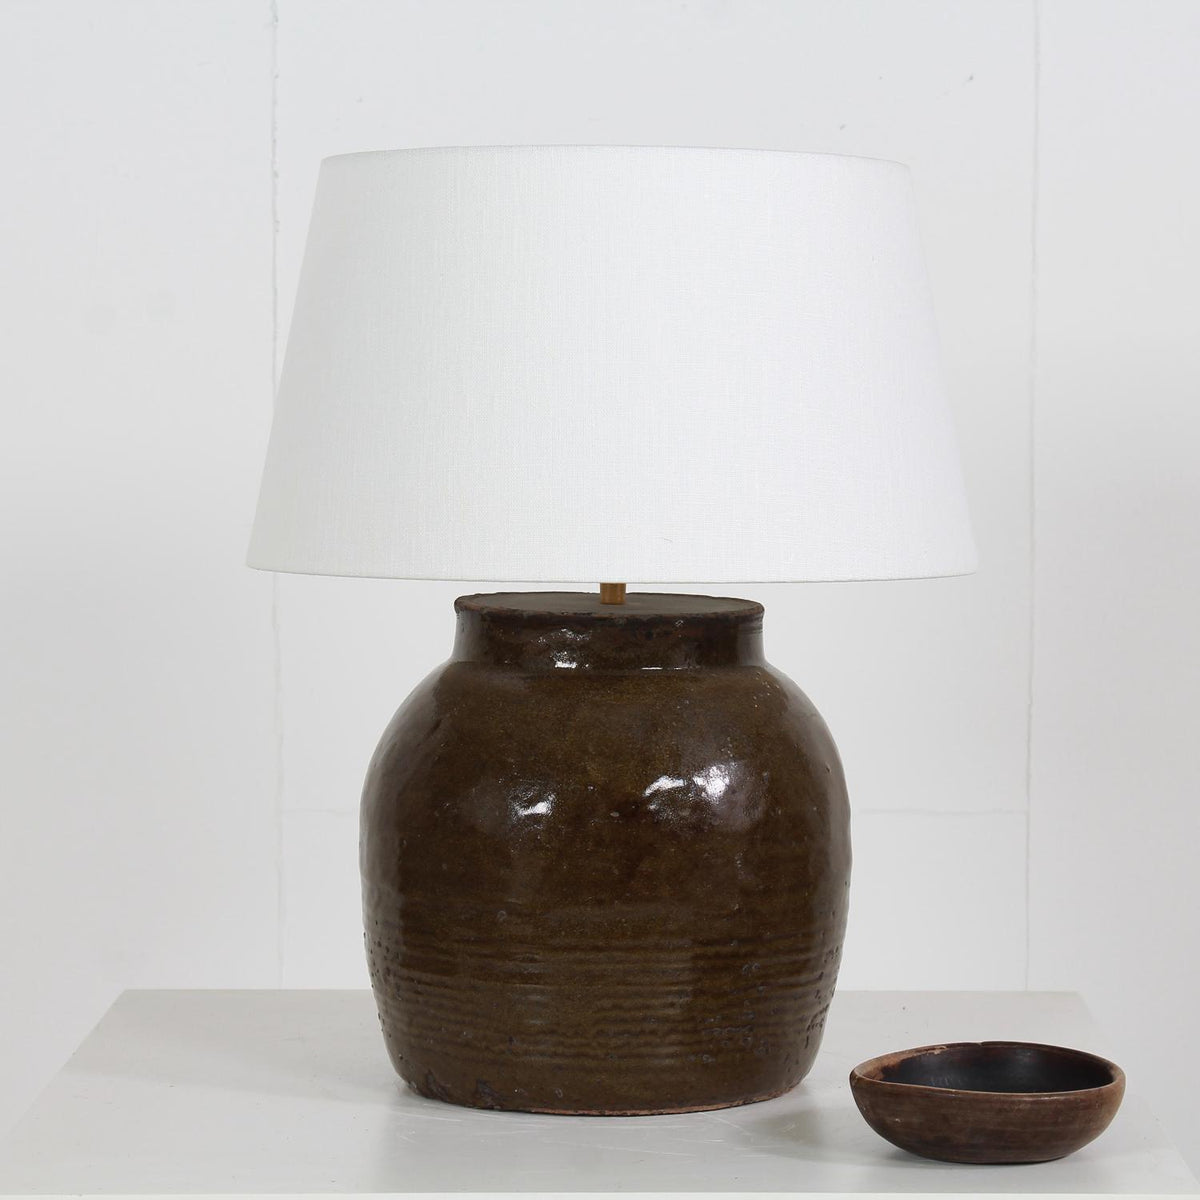 UNIQUE ANTIQUE BROWN GLAZED CERAMIC TABLE LAMP WITH White  LINEN SHADE